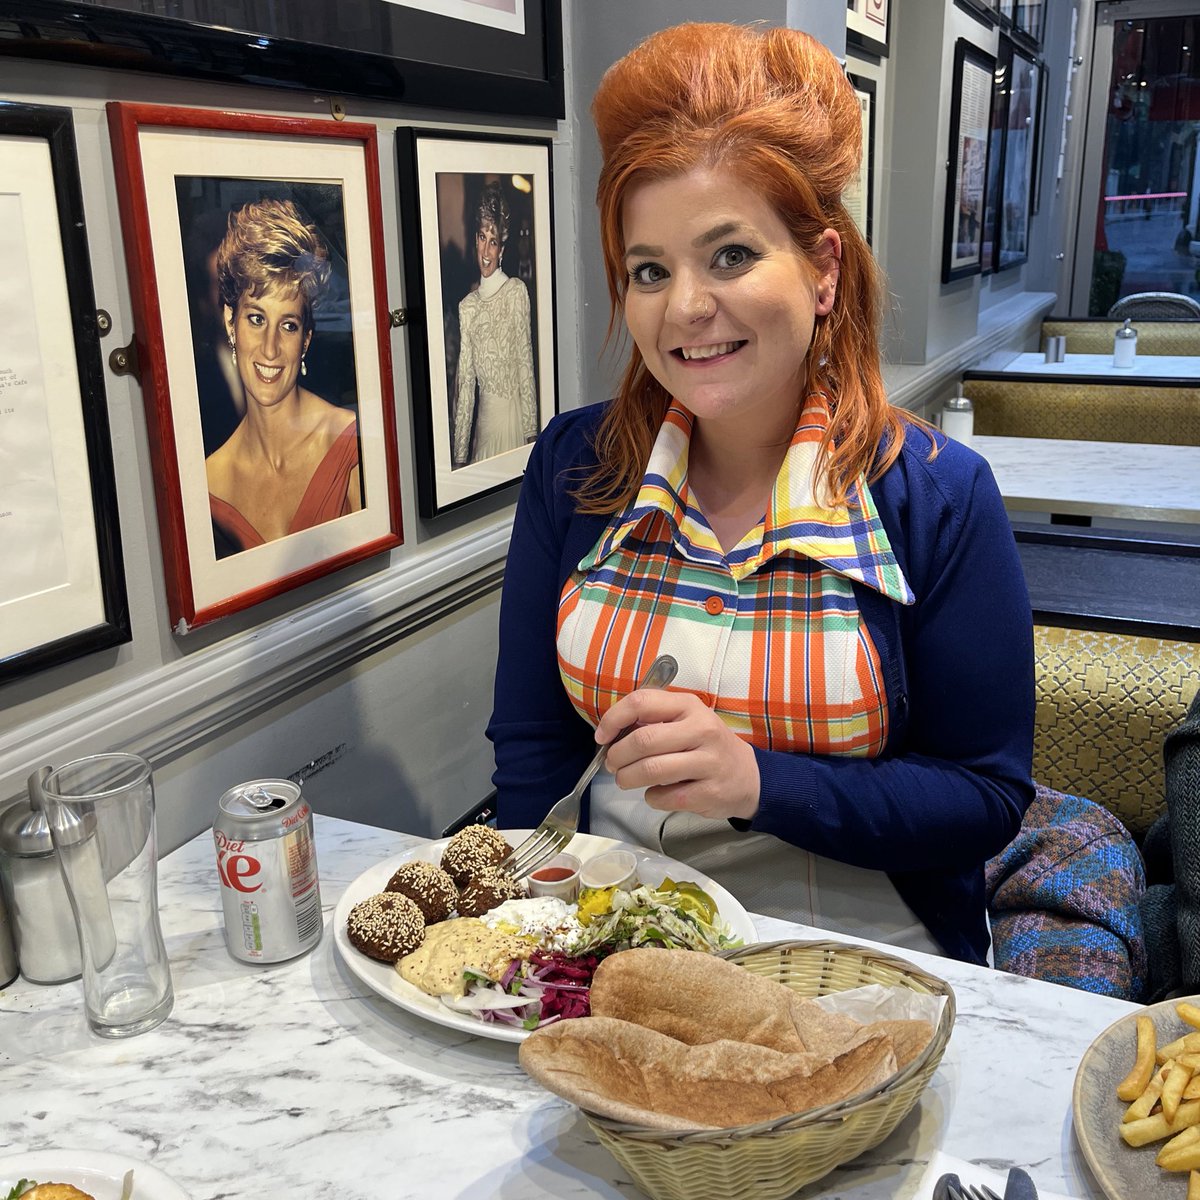 I was working down in London doing a little video for mid week this week and I decided my treat to myself was dinner at the Princess Diana cafe. I got food poisoning straight after, but it was good whilst it lasted 🥲